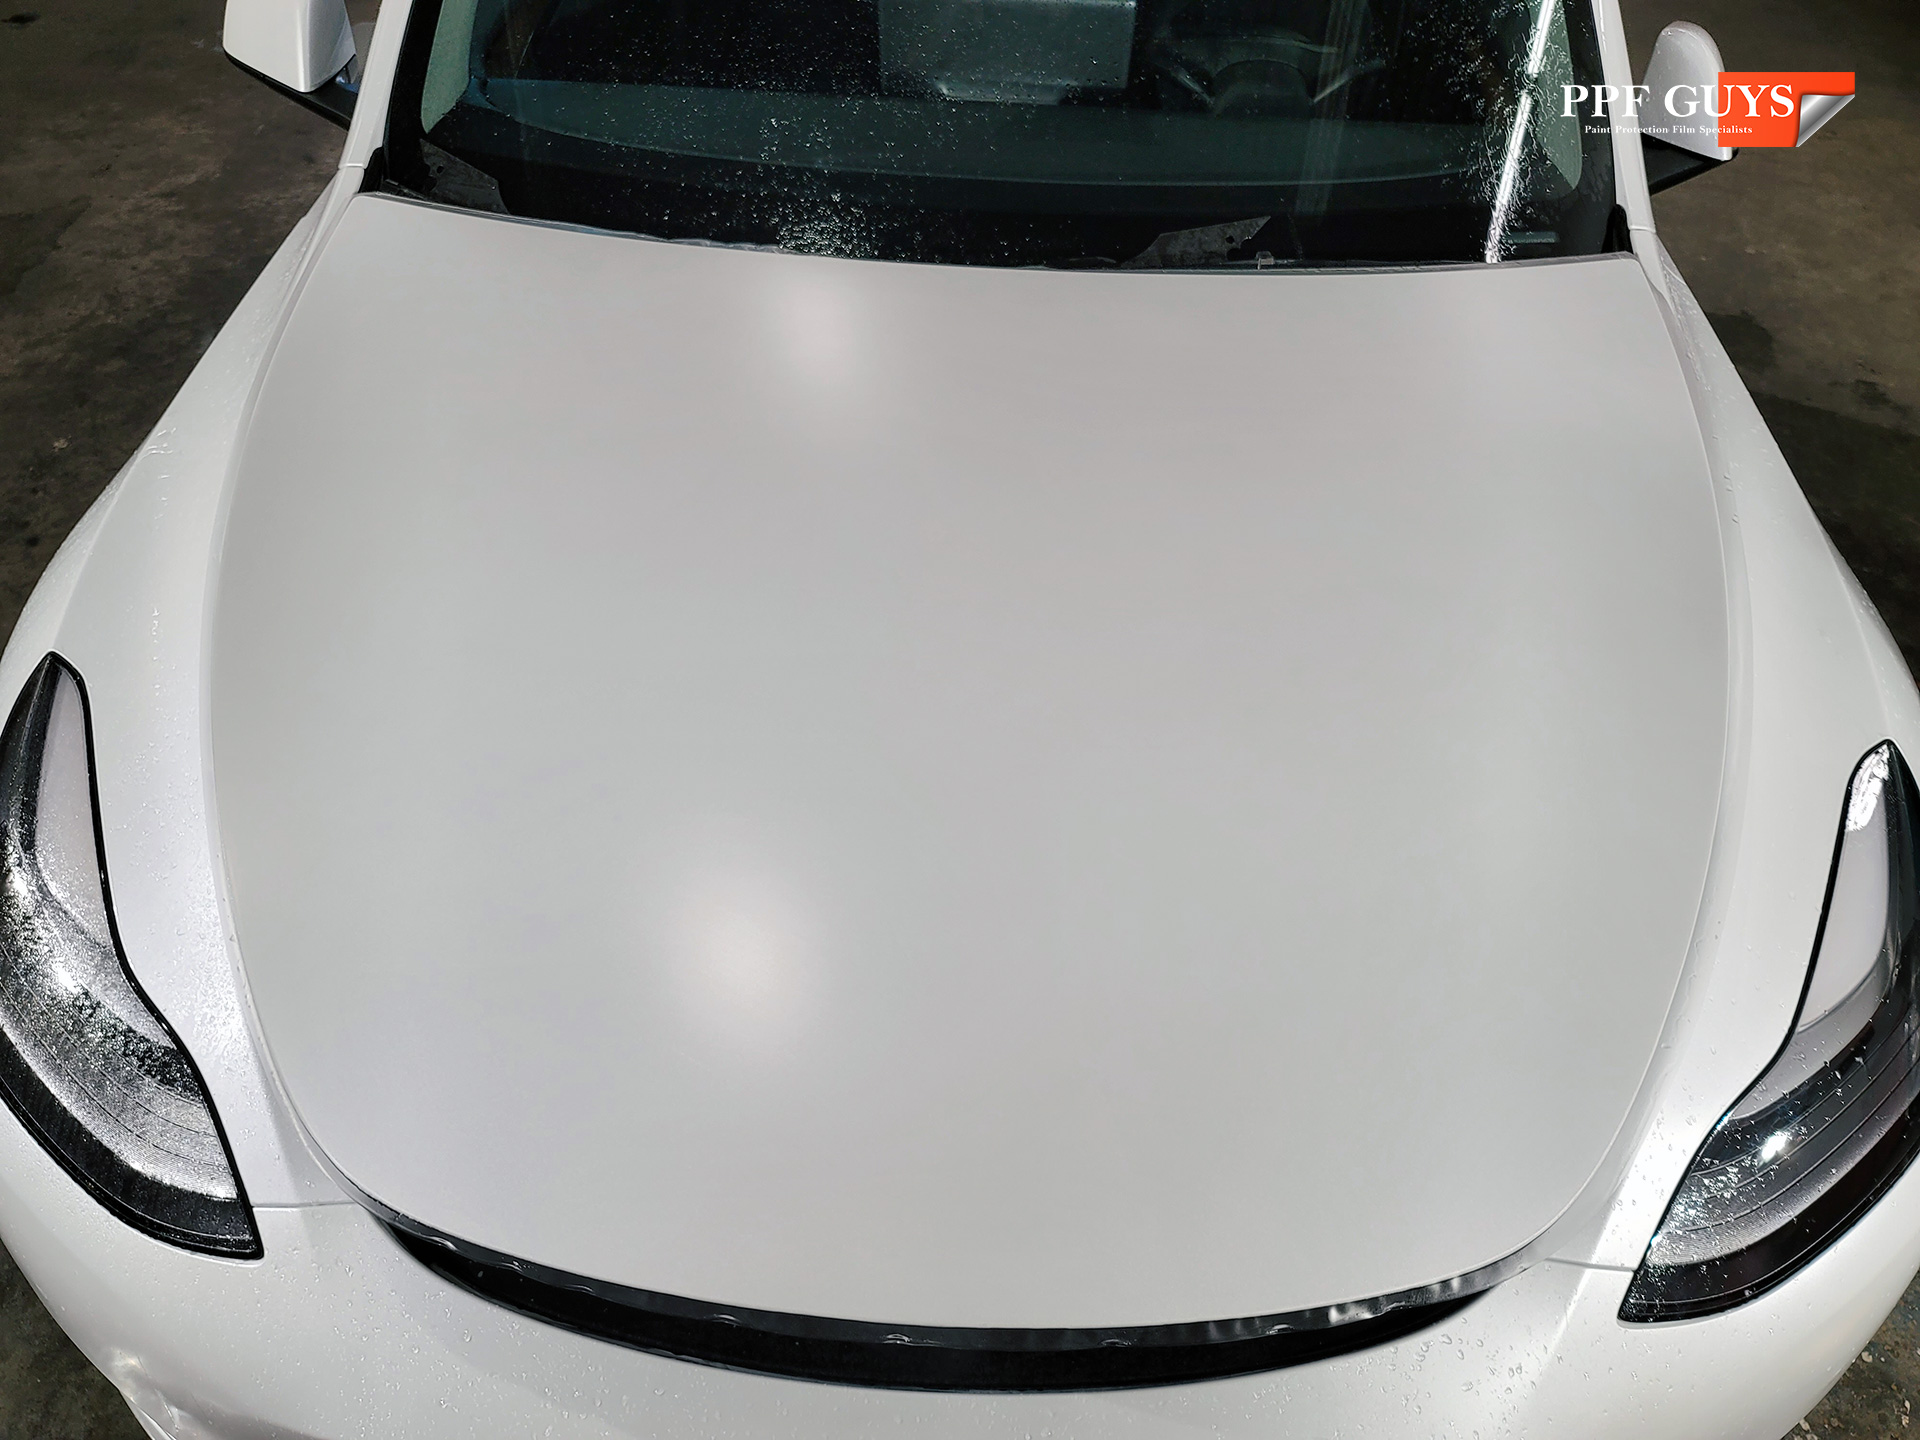 PPF Guys Model Y White Xpel Stealth, ceramic, painted emblems (15).jpg